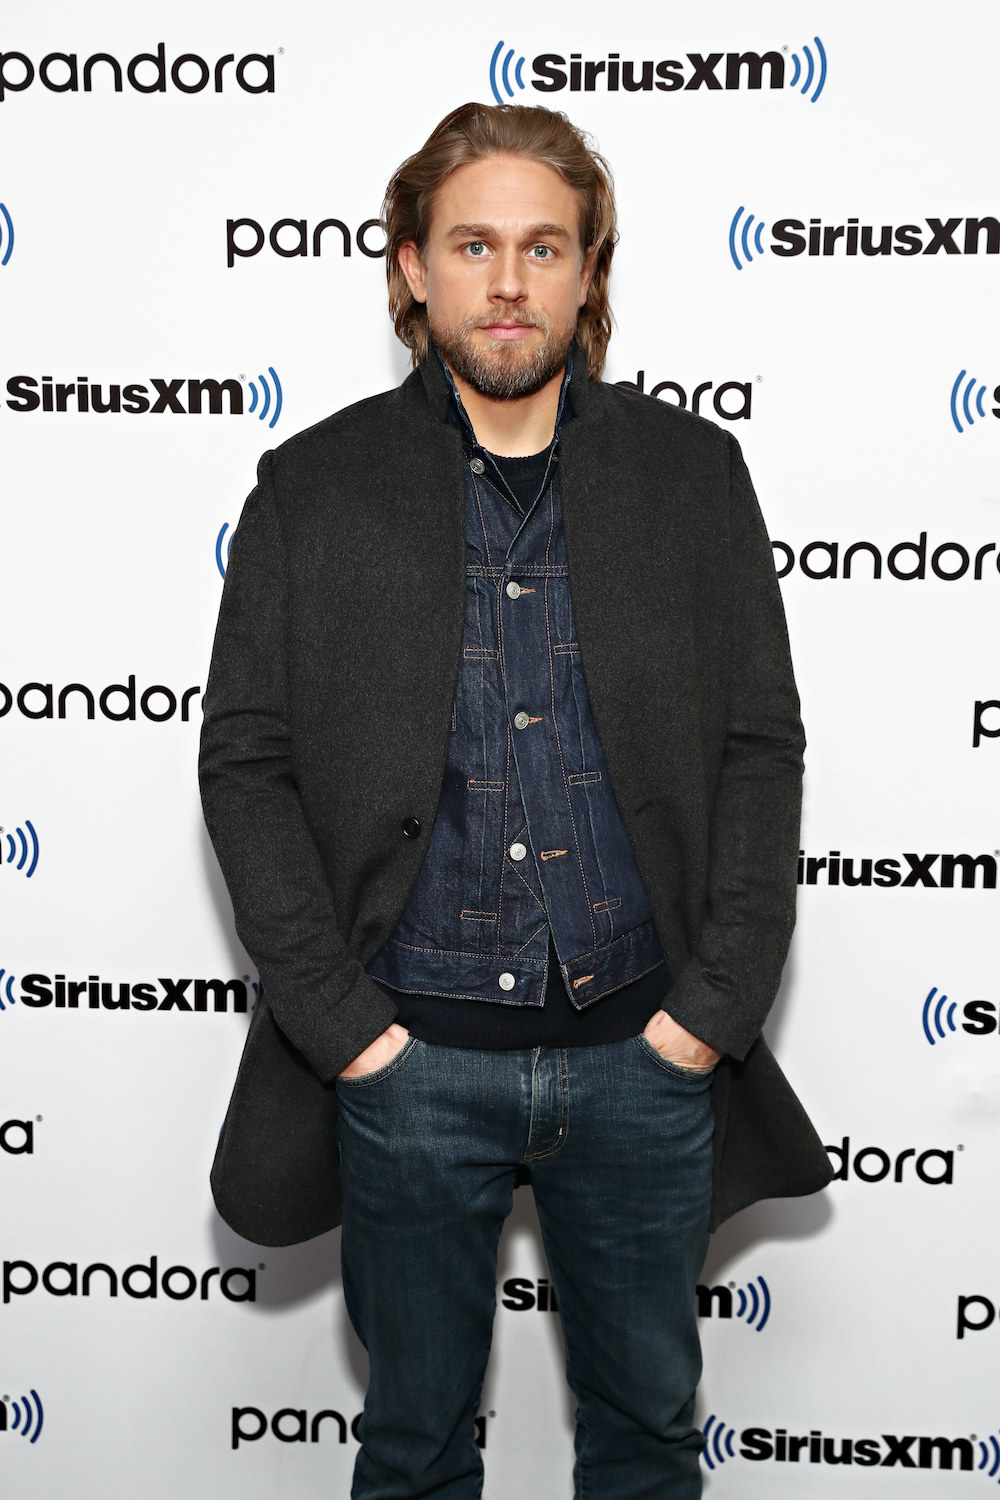 Hunnam at an event wearing a denim outfit and long hair